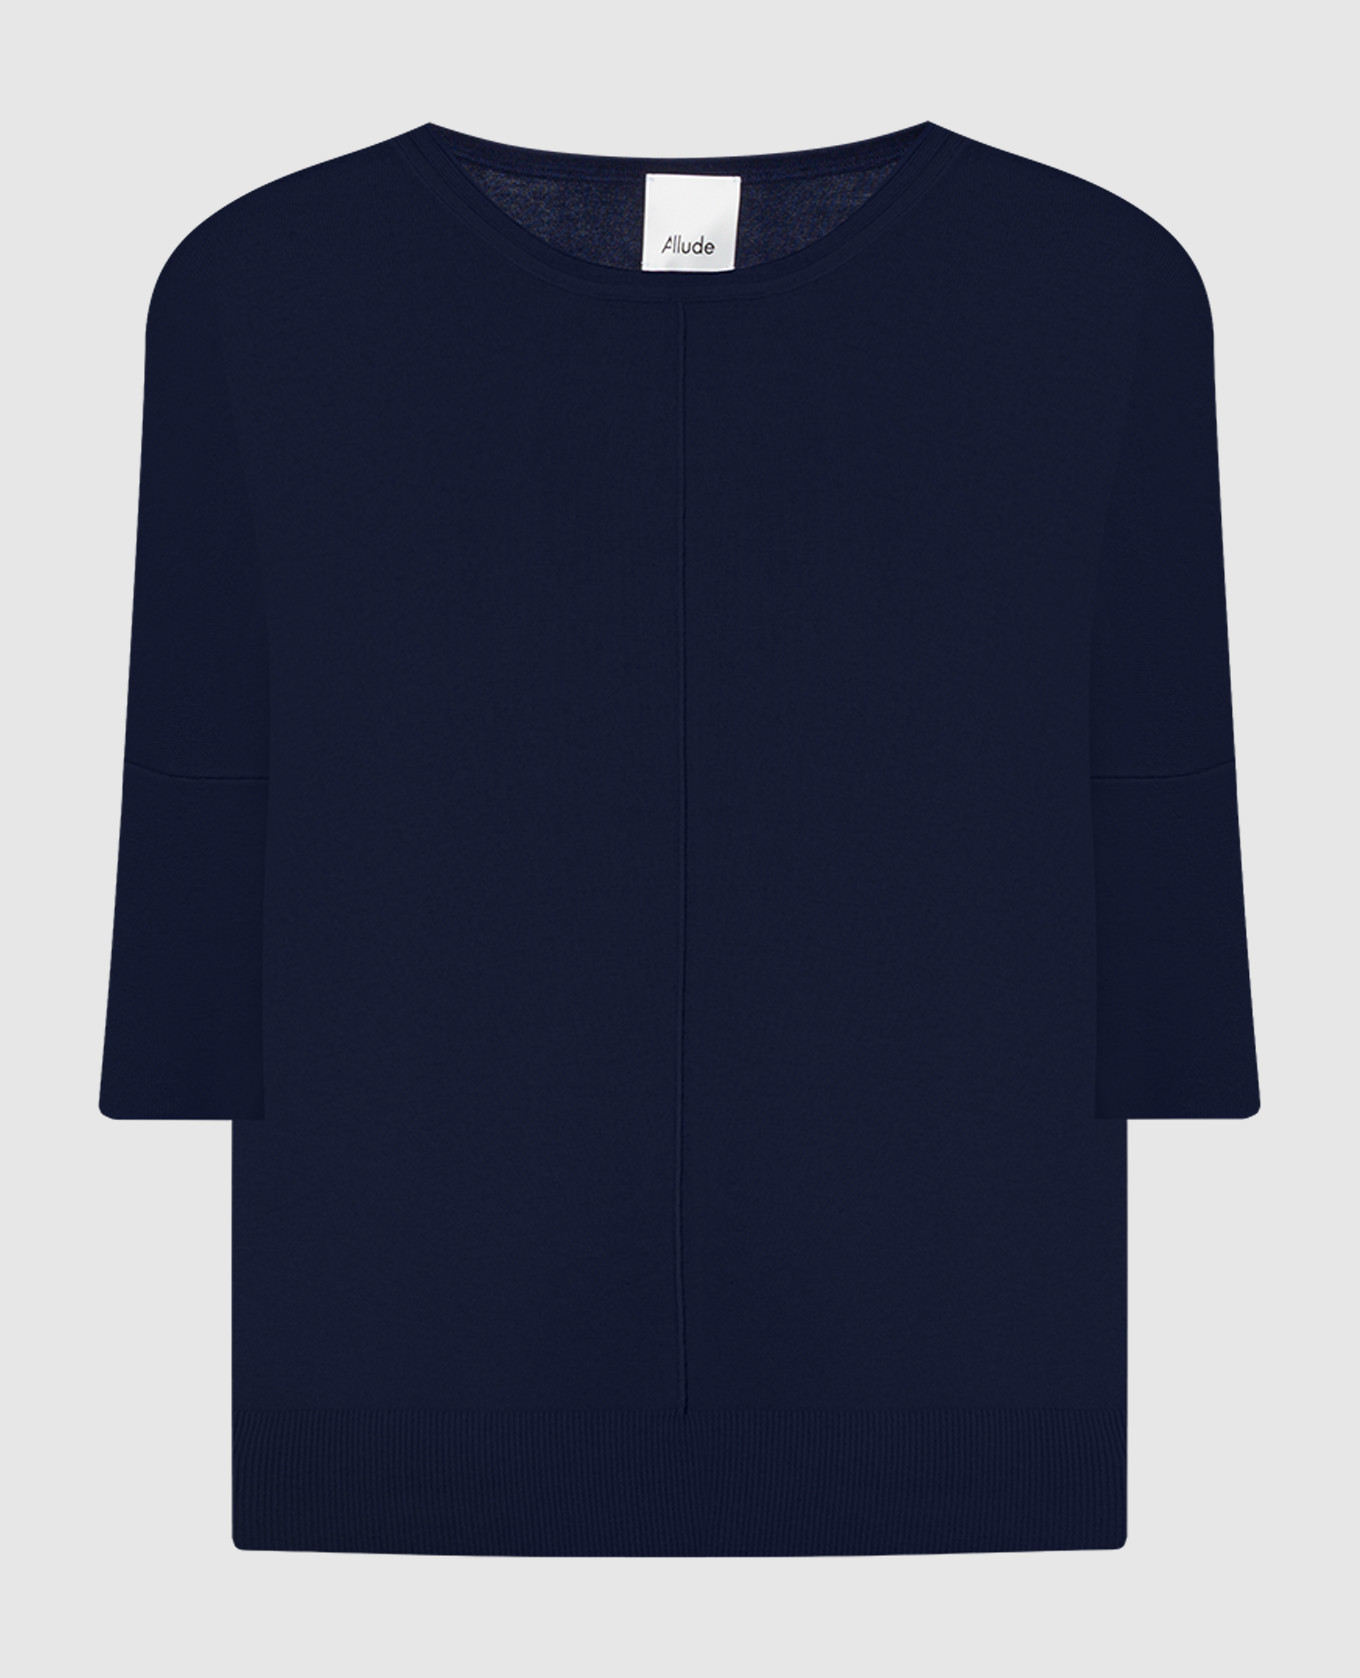 Blue jumper with silk and cashmere